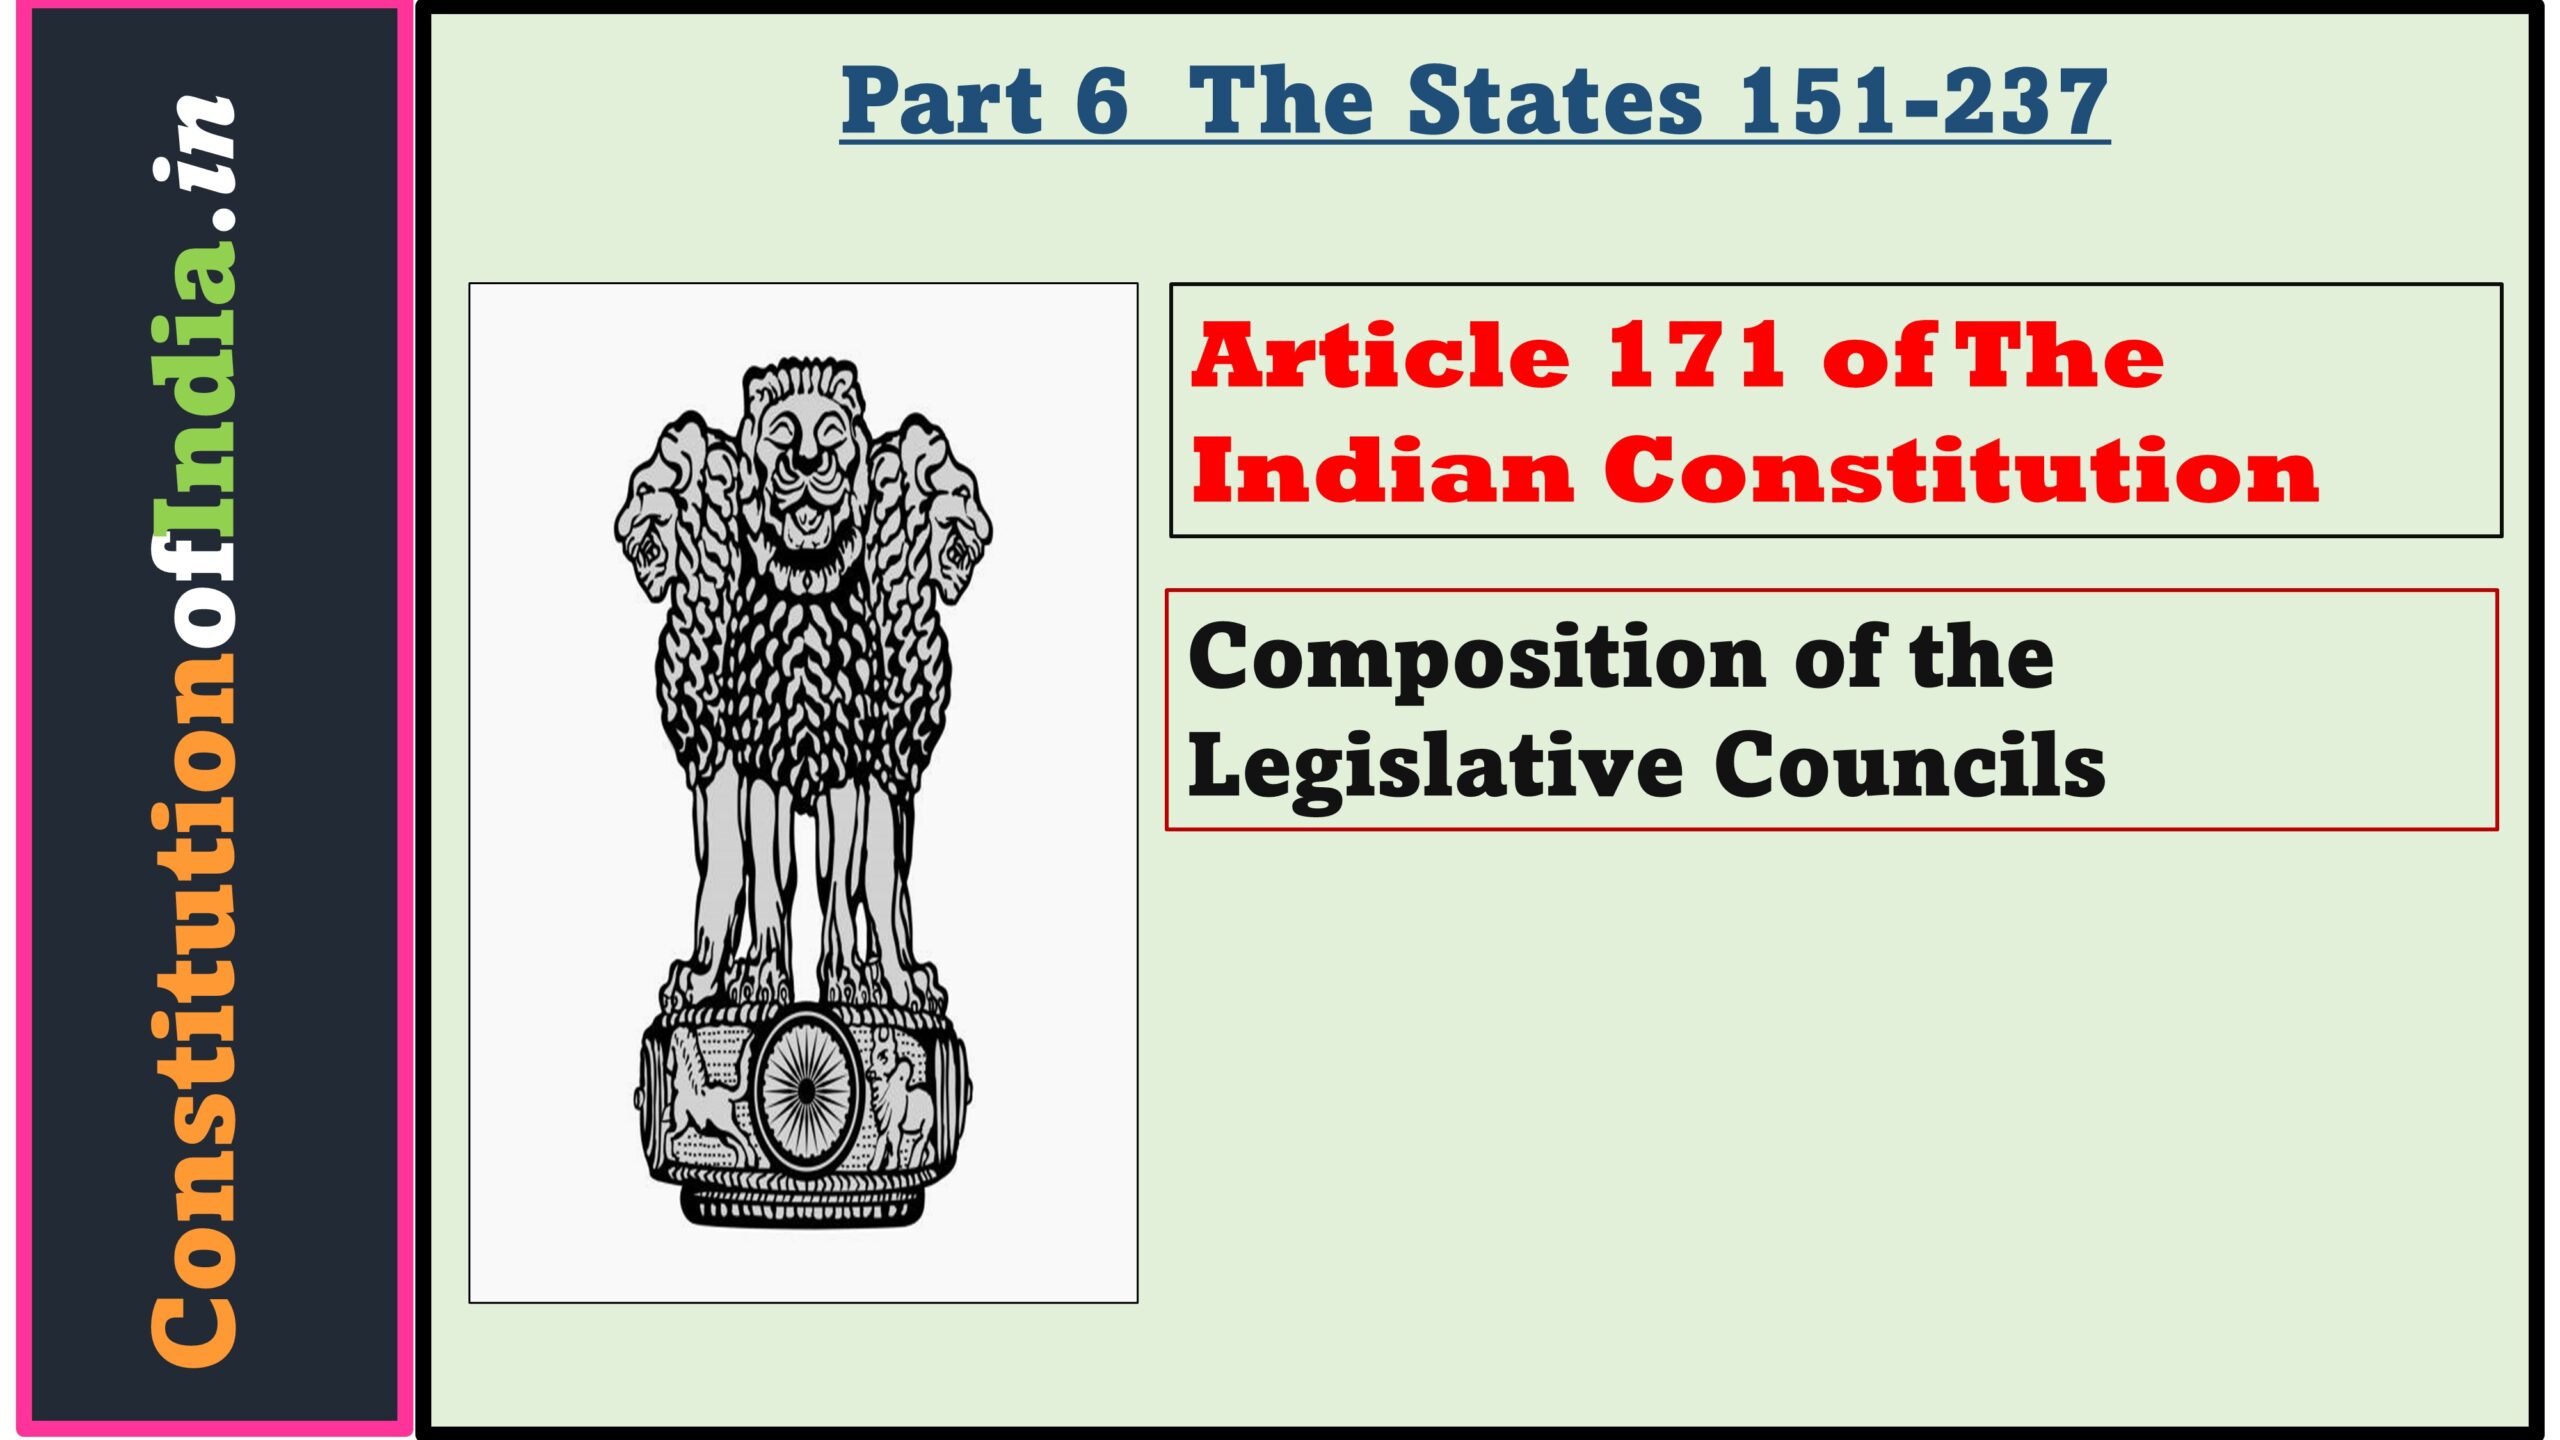 Article 171 of The Indian Constitution